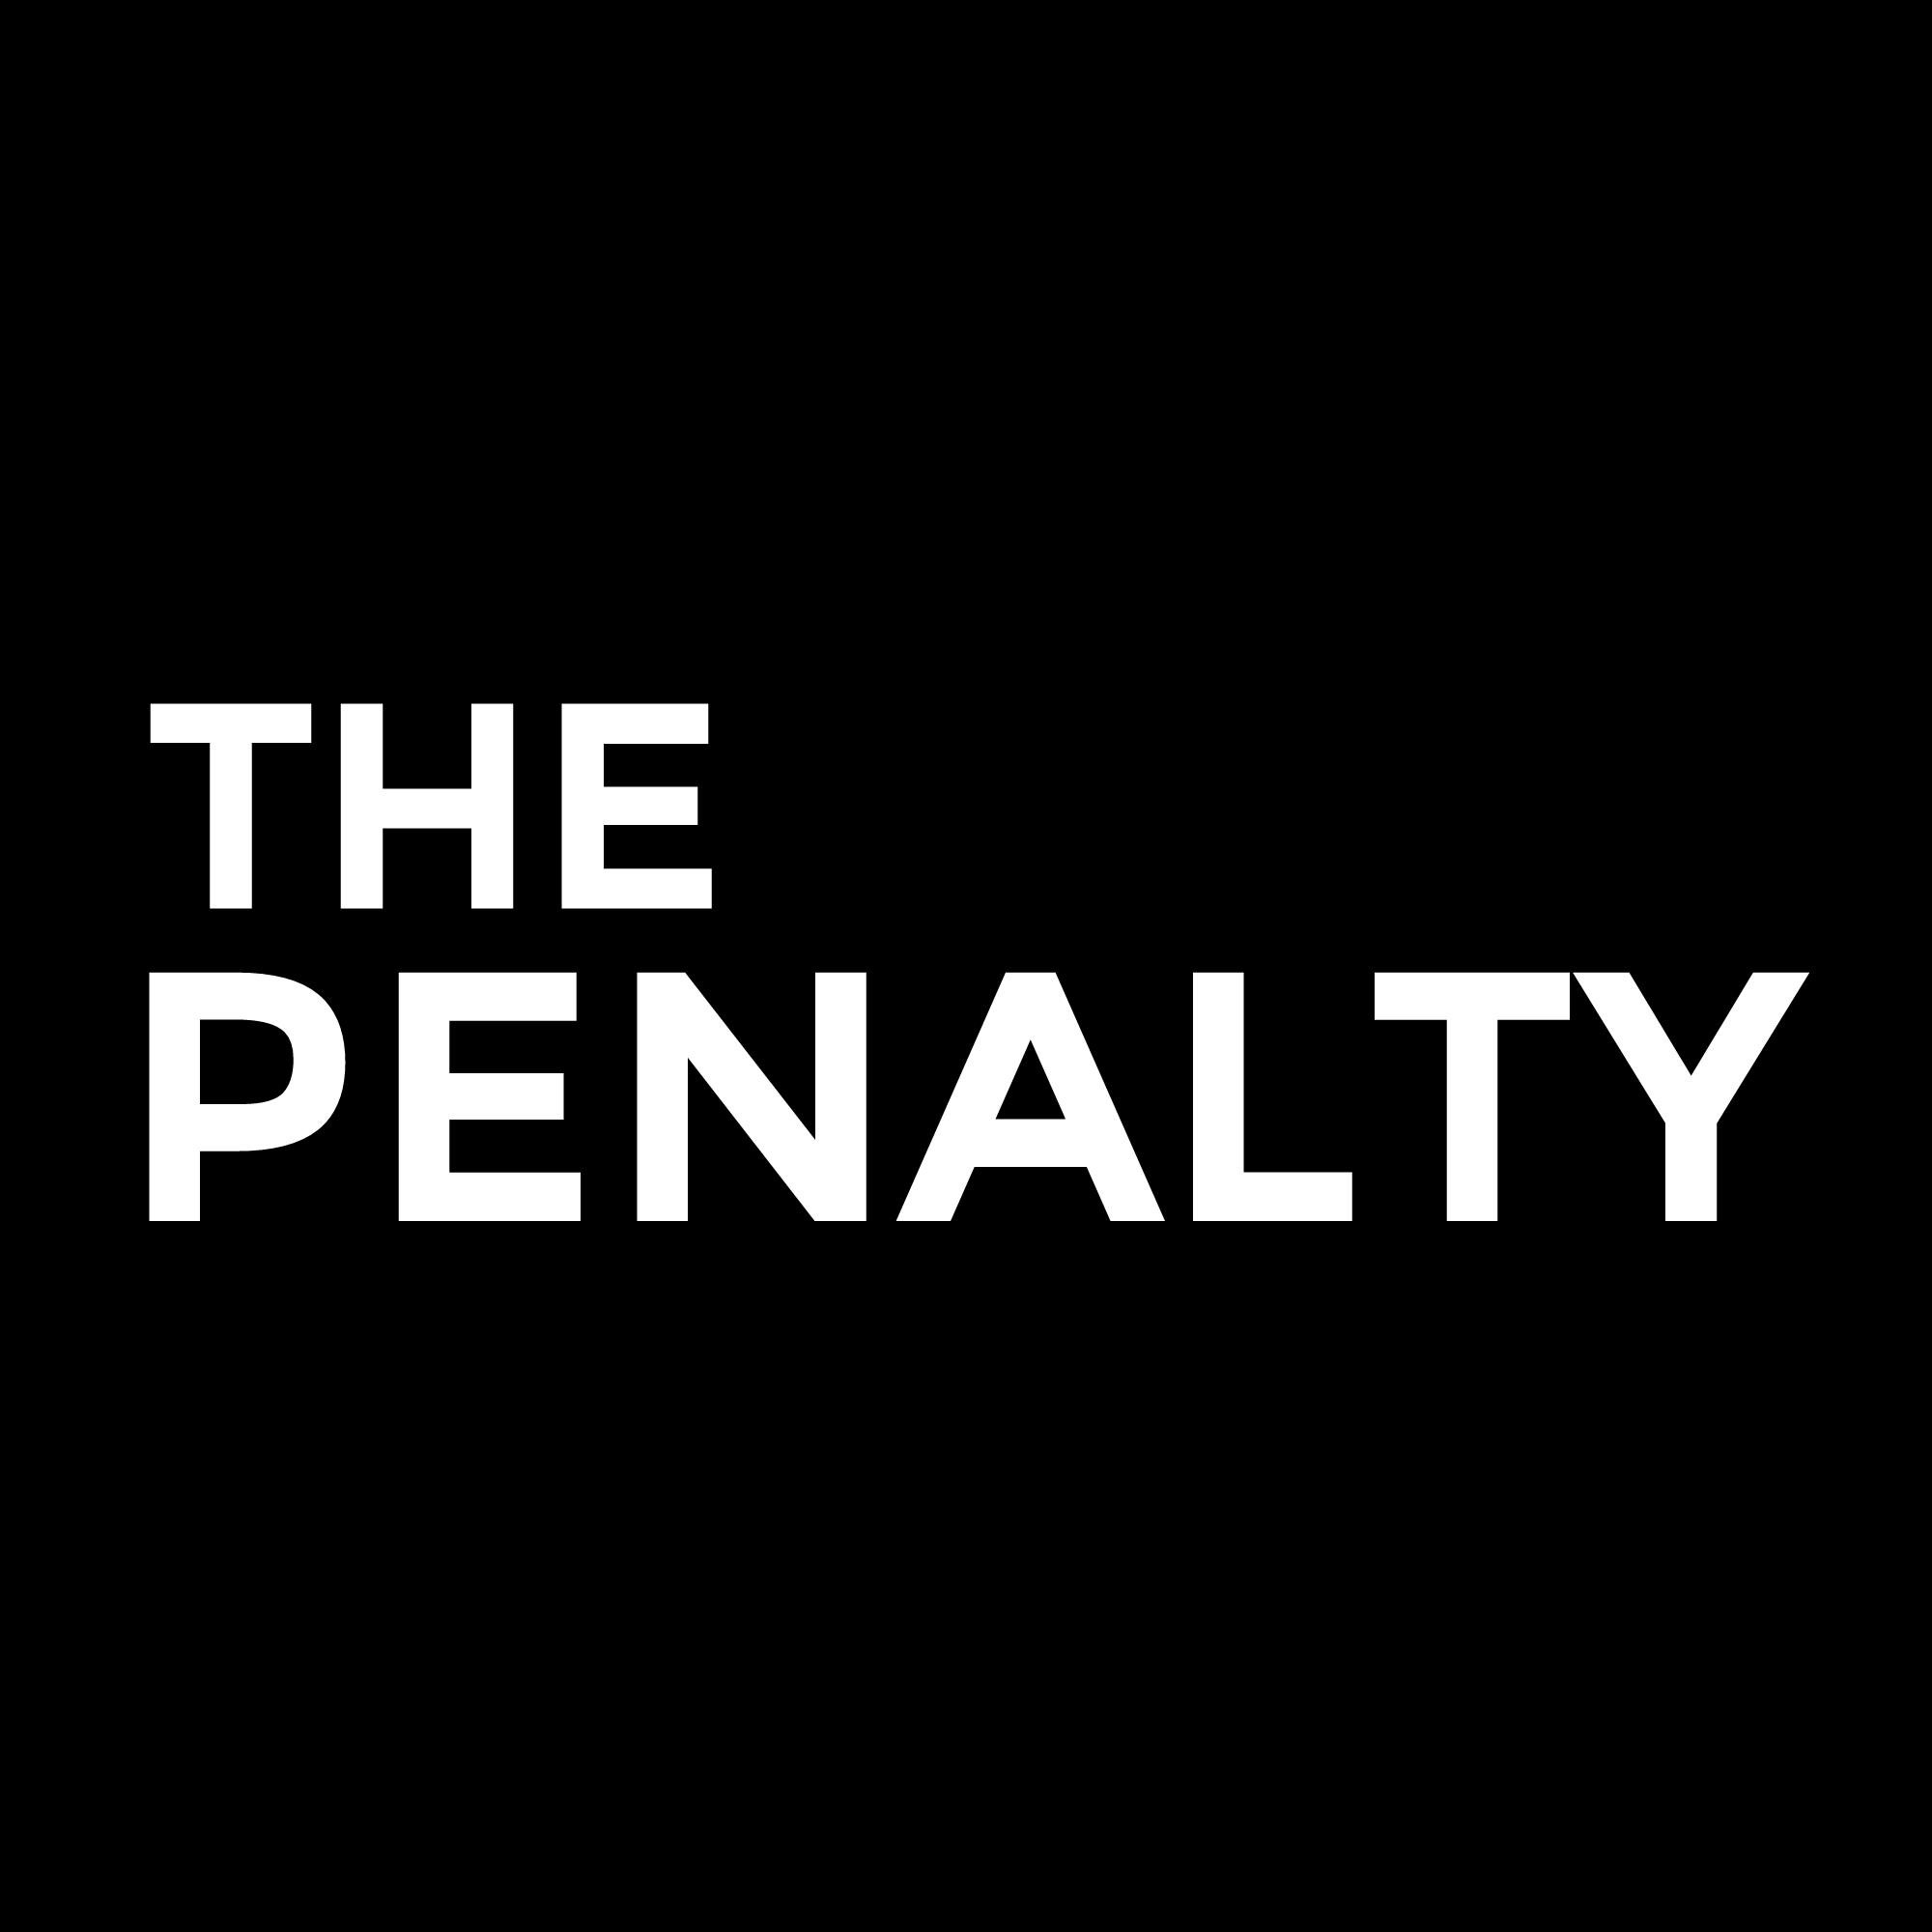 Documentary film following three people with extraordinary experiences of America's modern death penalty